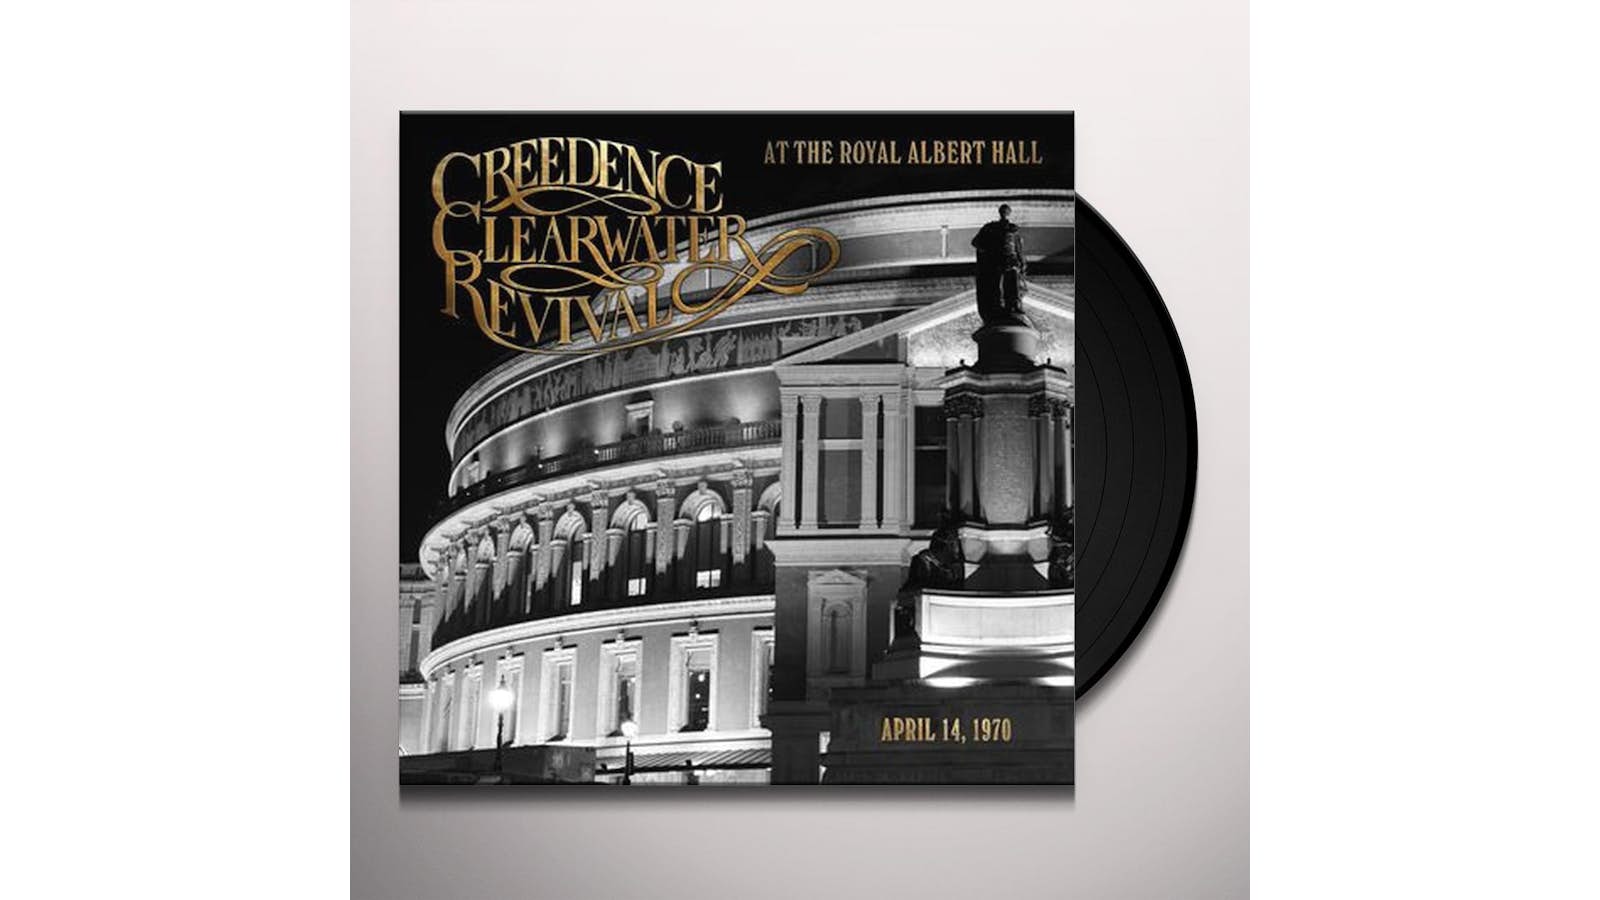 Creedence Clearwater Revival - at The Royal Albert Hall [Vinyl]